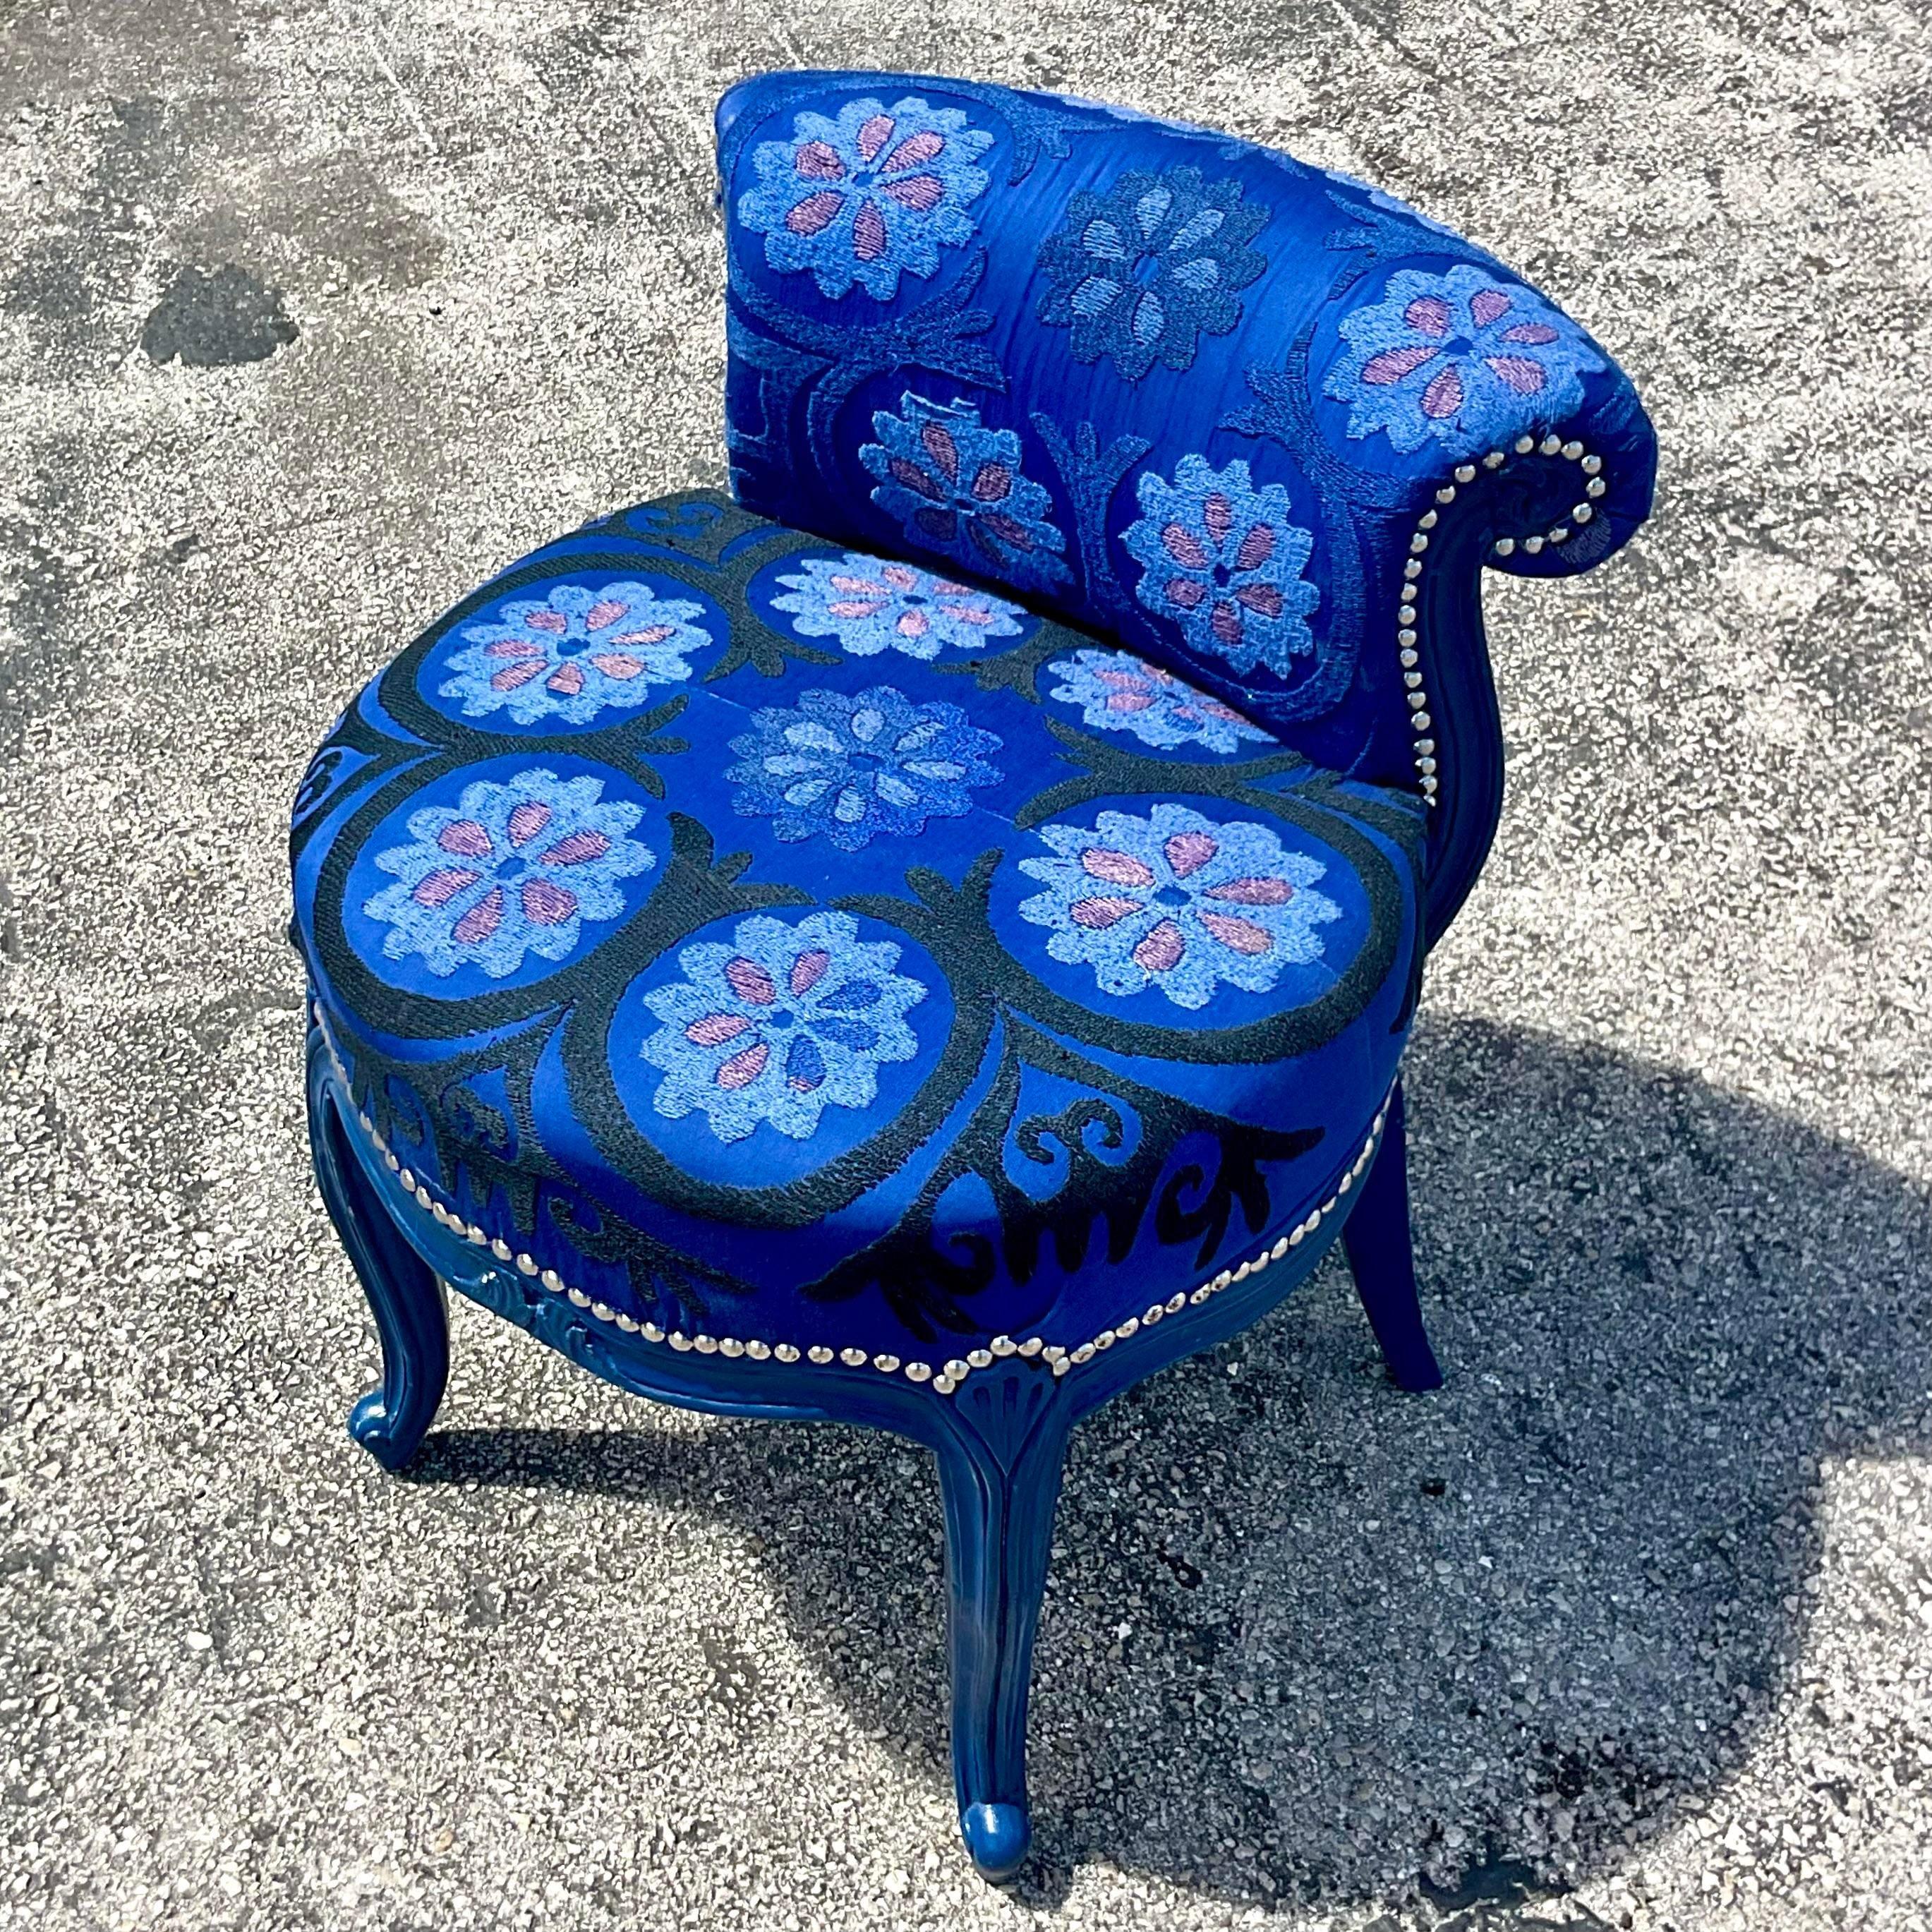 A fabulous vanity stool in a gorgeous shade of royal blue with mandala flowers embroidered on to it. Acquired in a Palm Beach estate.